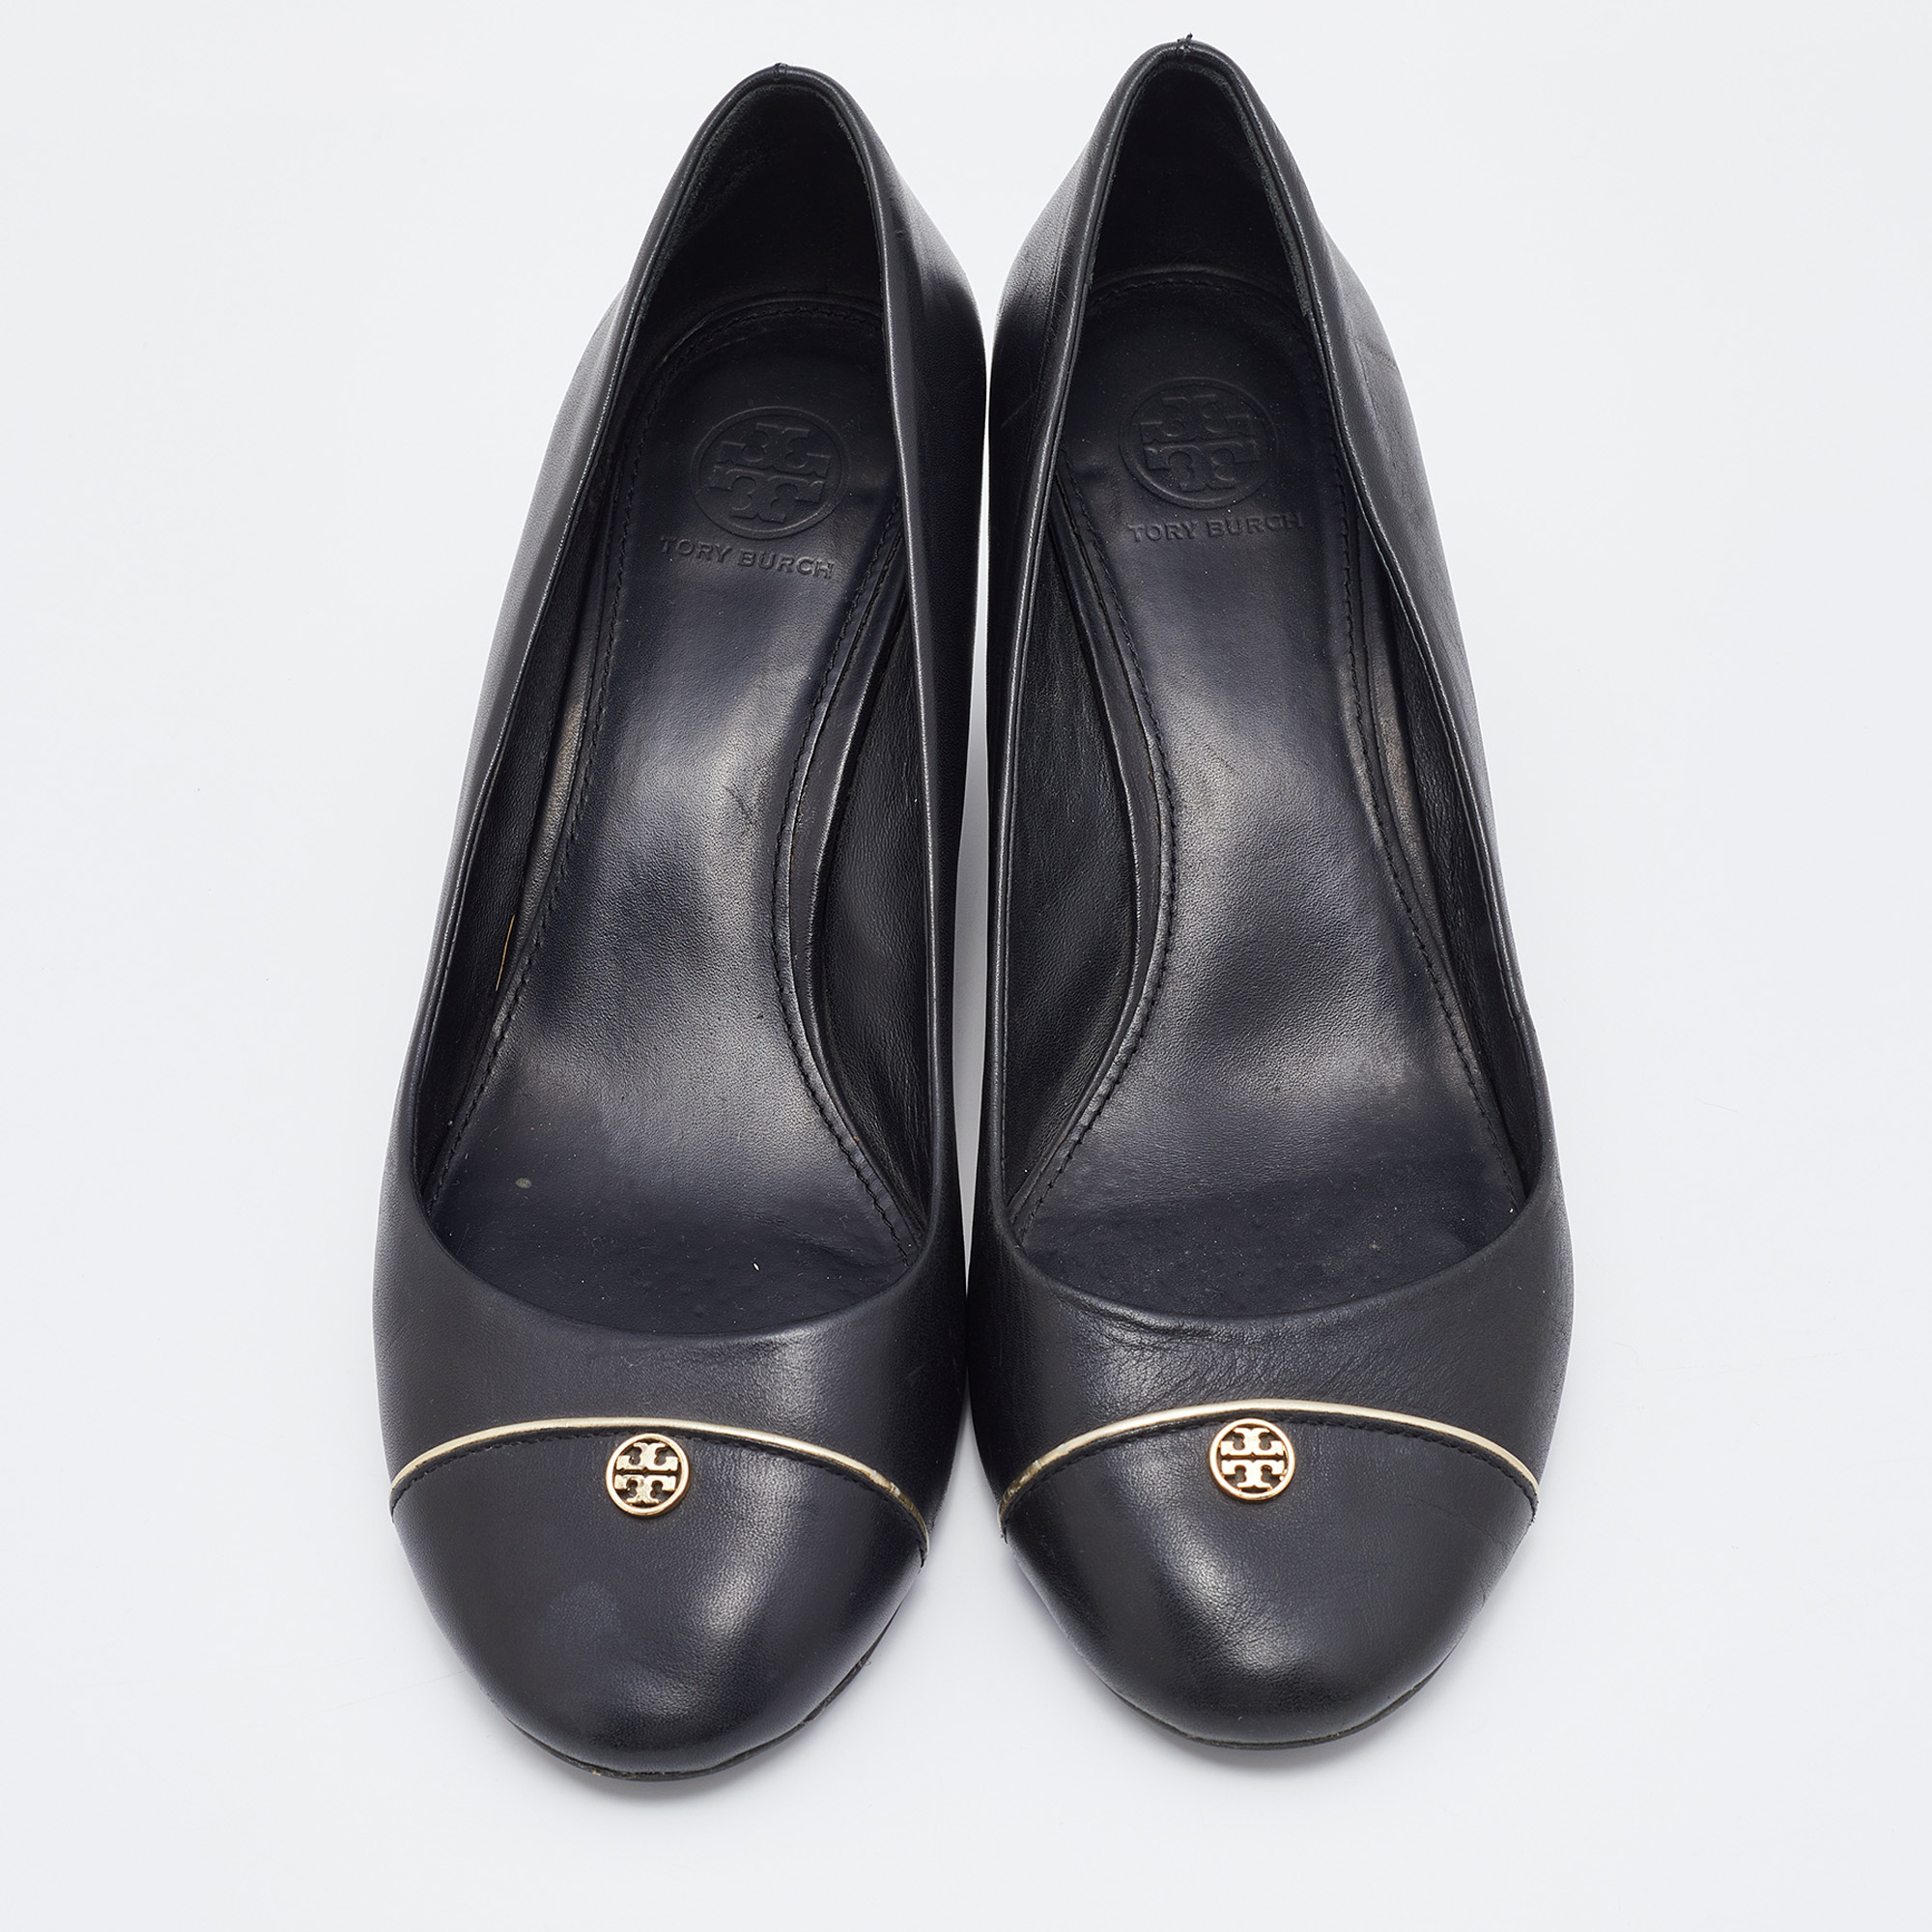 Tory Burch Black Leather Cap Toe Wedge Pumps Size 40